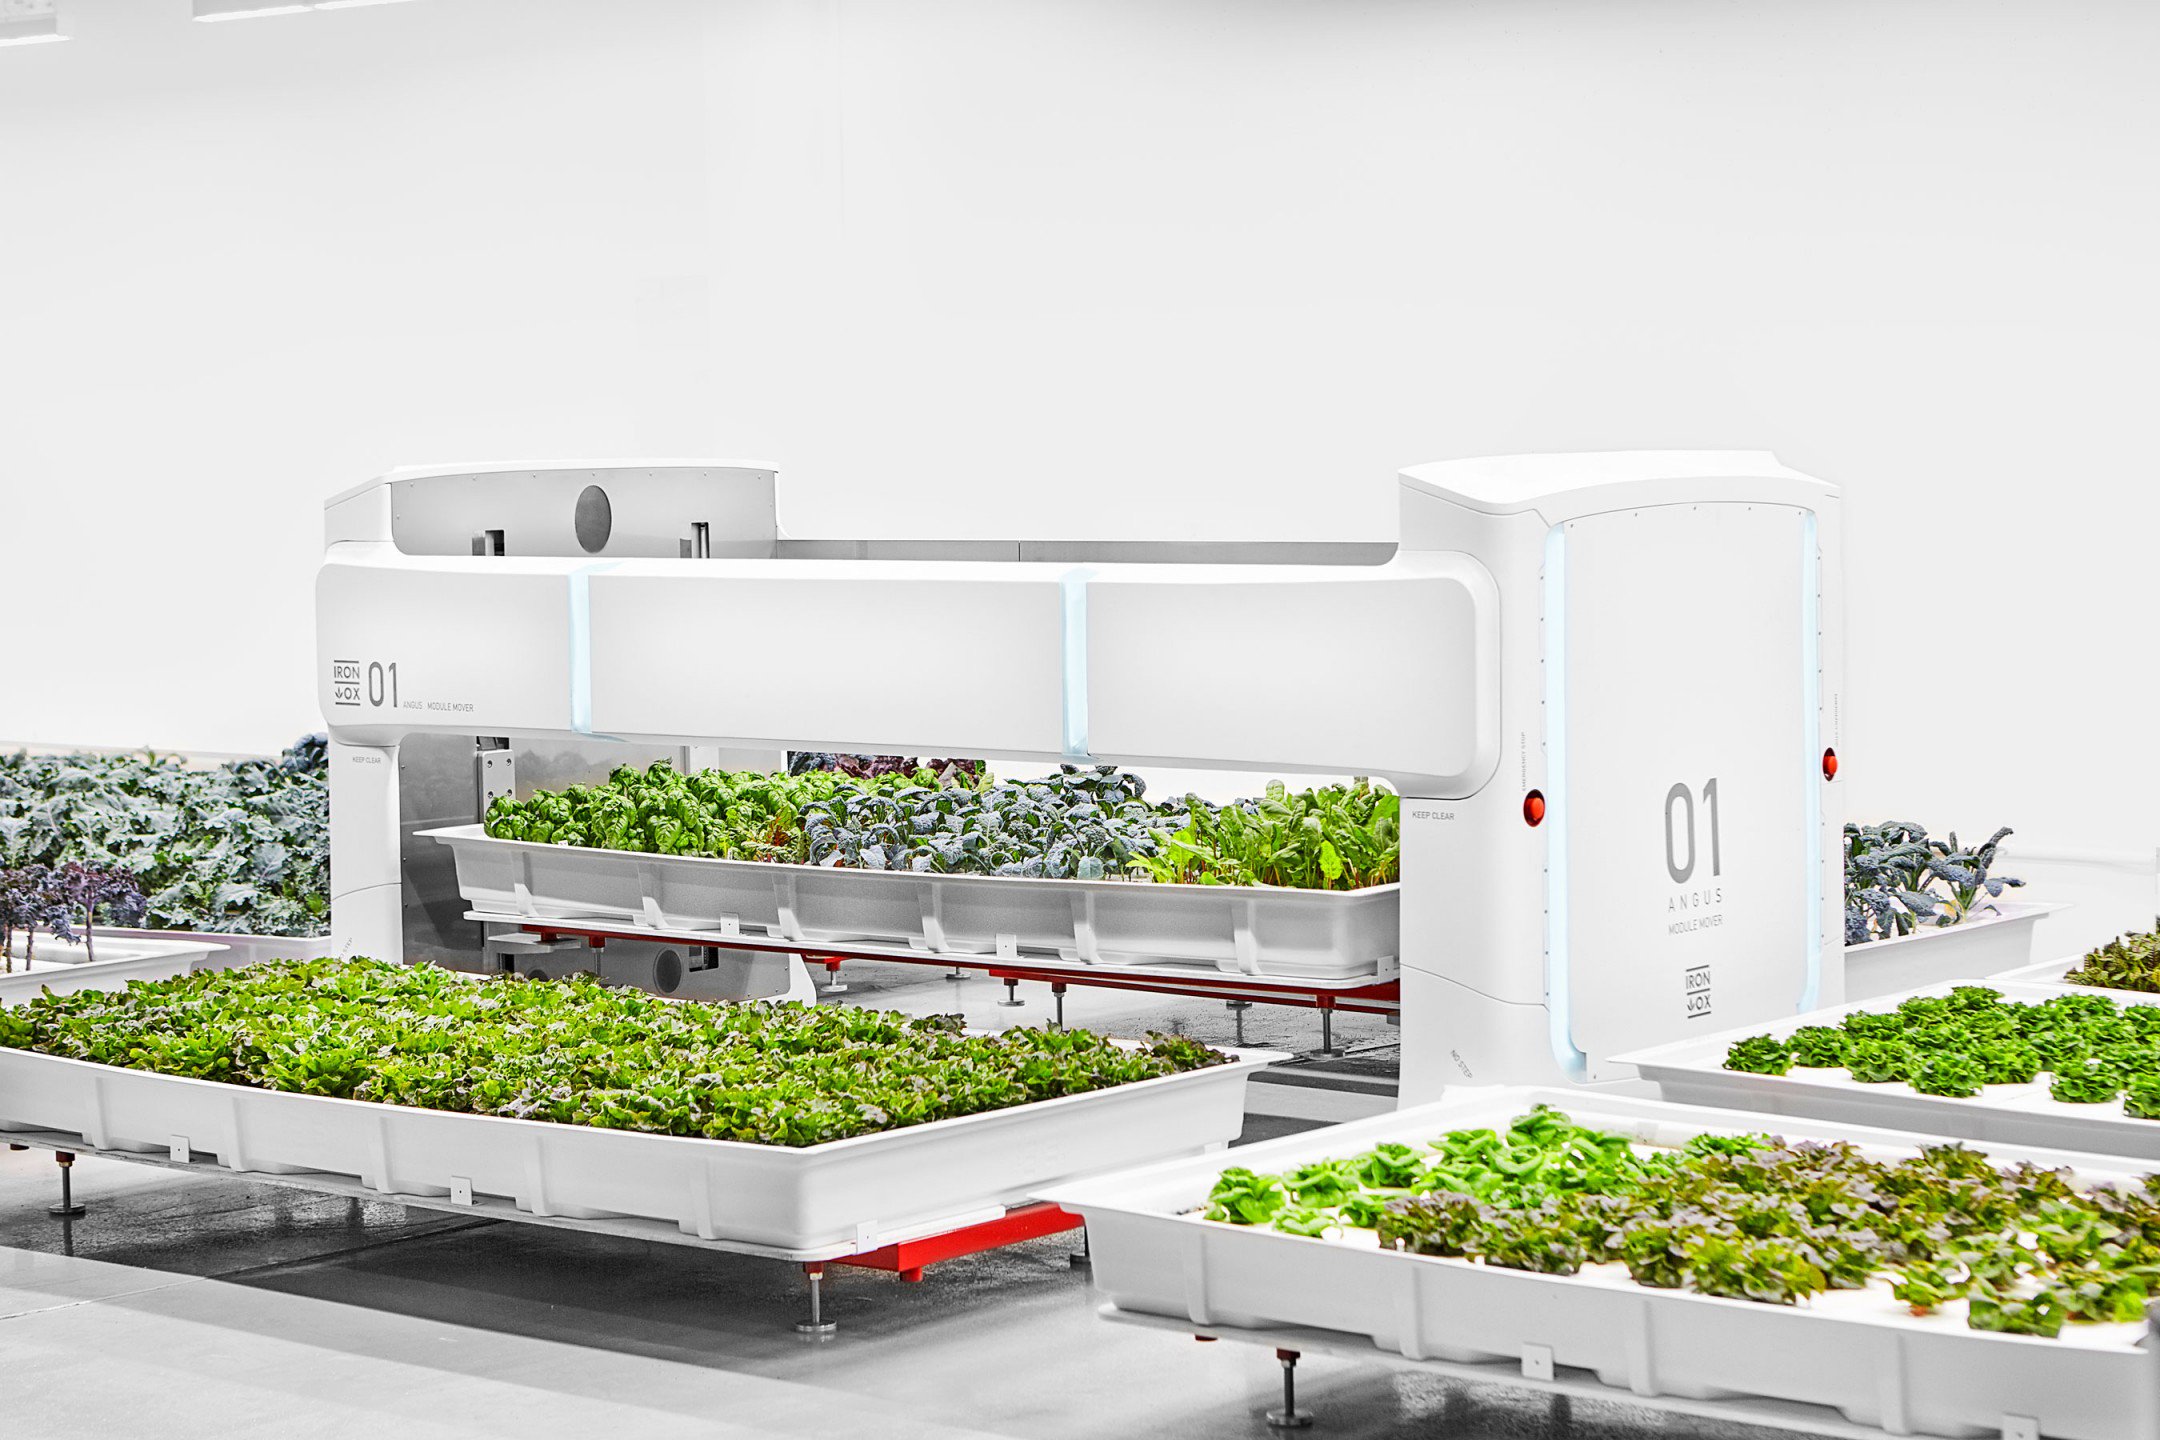 A robotic mover transfers a hydroponic container of leafy greens at Iron Ox’s growing facility. (Courtesy: Iron Ox)